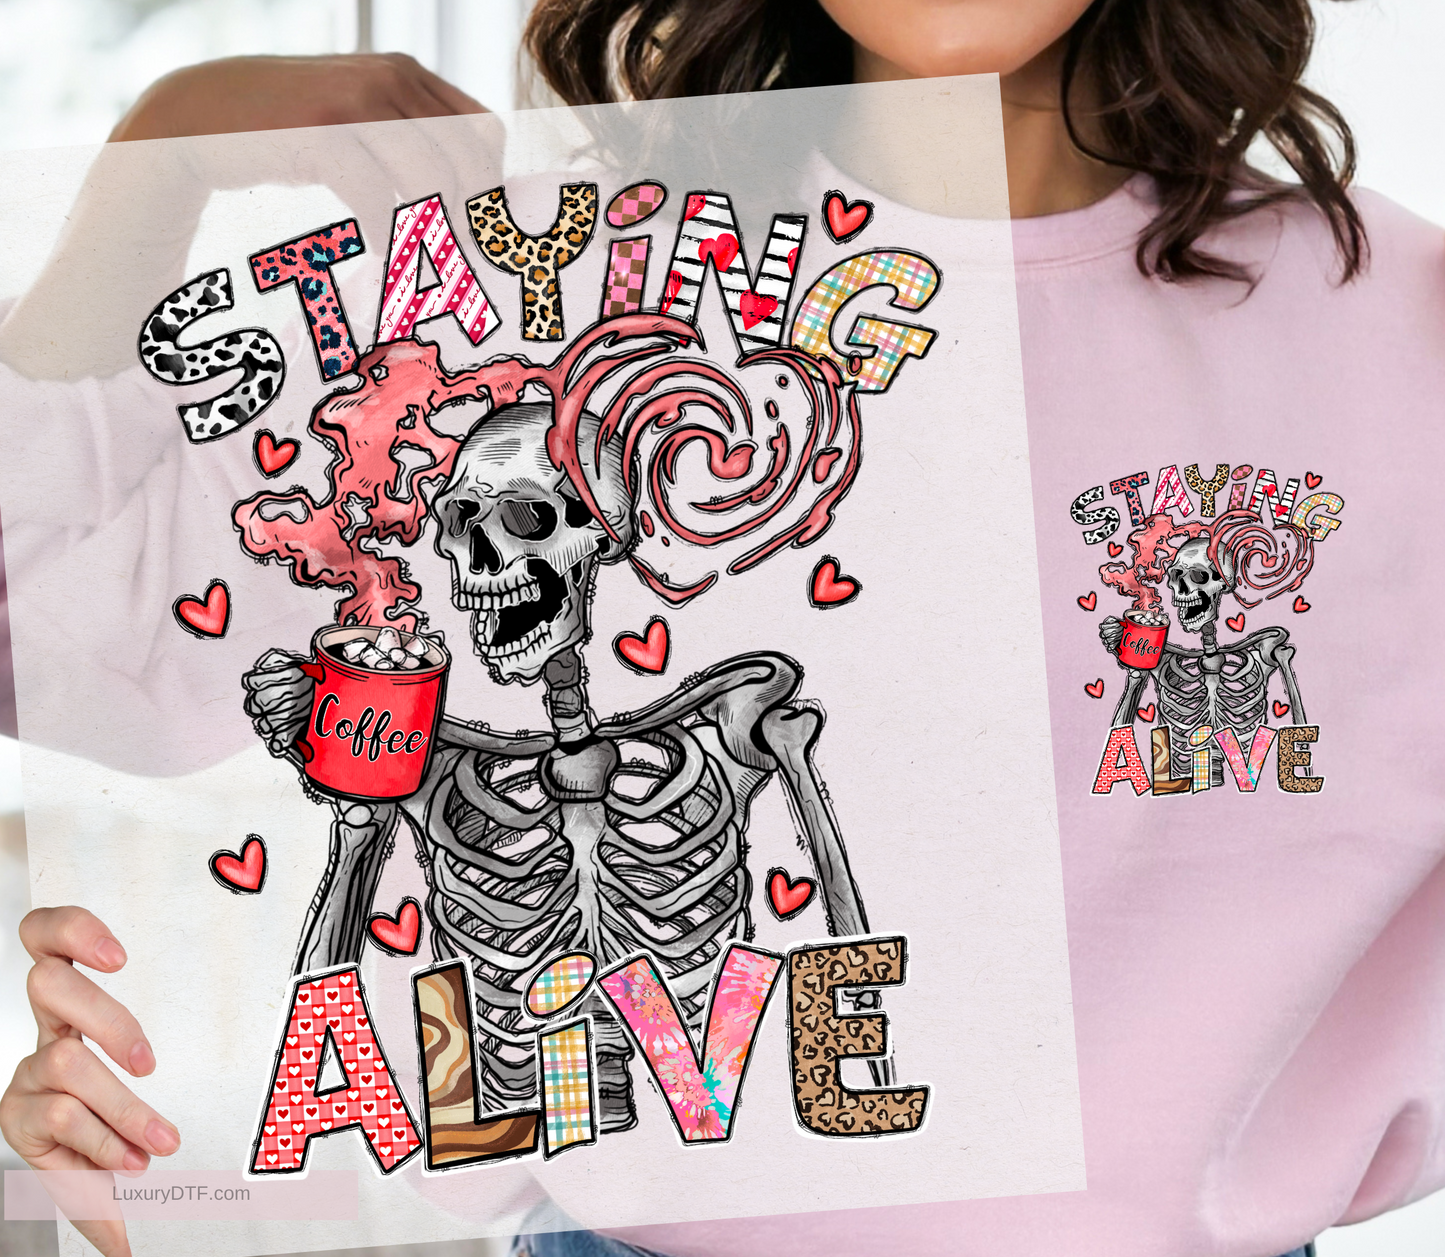 Funny illustration skeleton design with colorful text "Staying Alive" drinking his/her favorite coffee, with vapor in a shape of heart. DTF transfer ready to press, screen print transfer | Luxurydtf.com